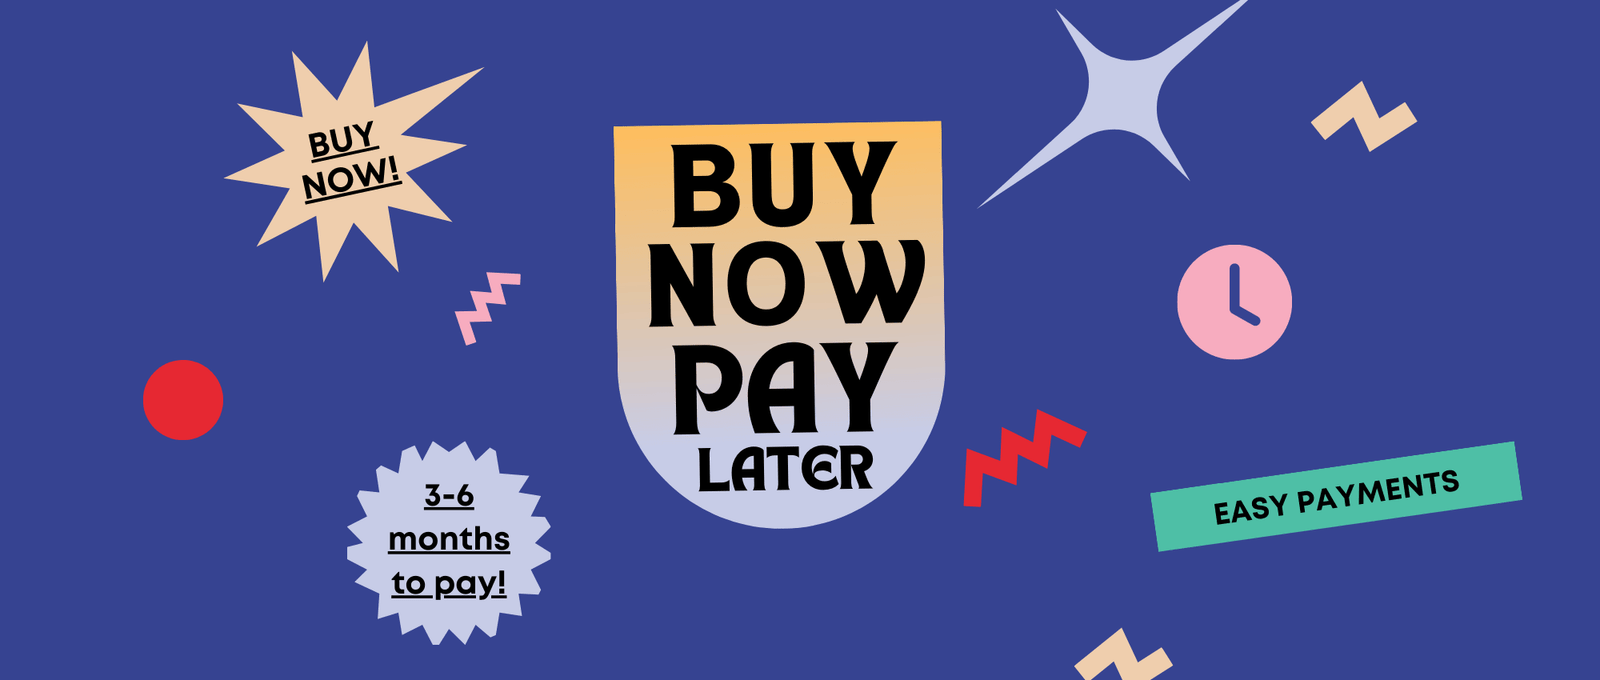 Buy Now, Pay Later | Manalei Media